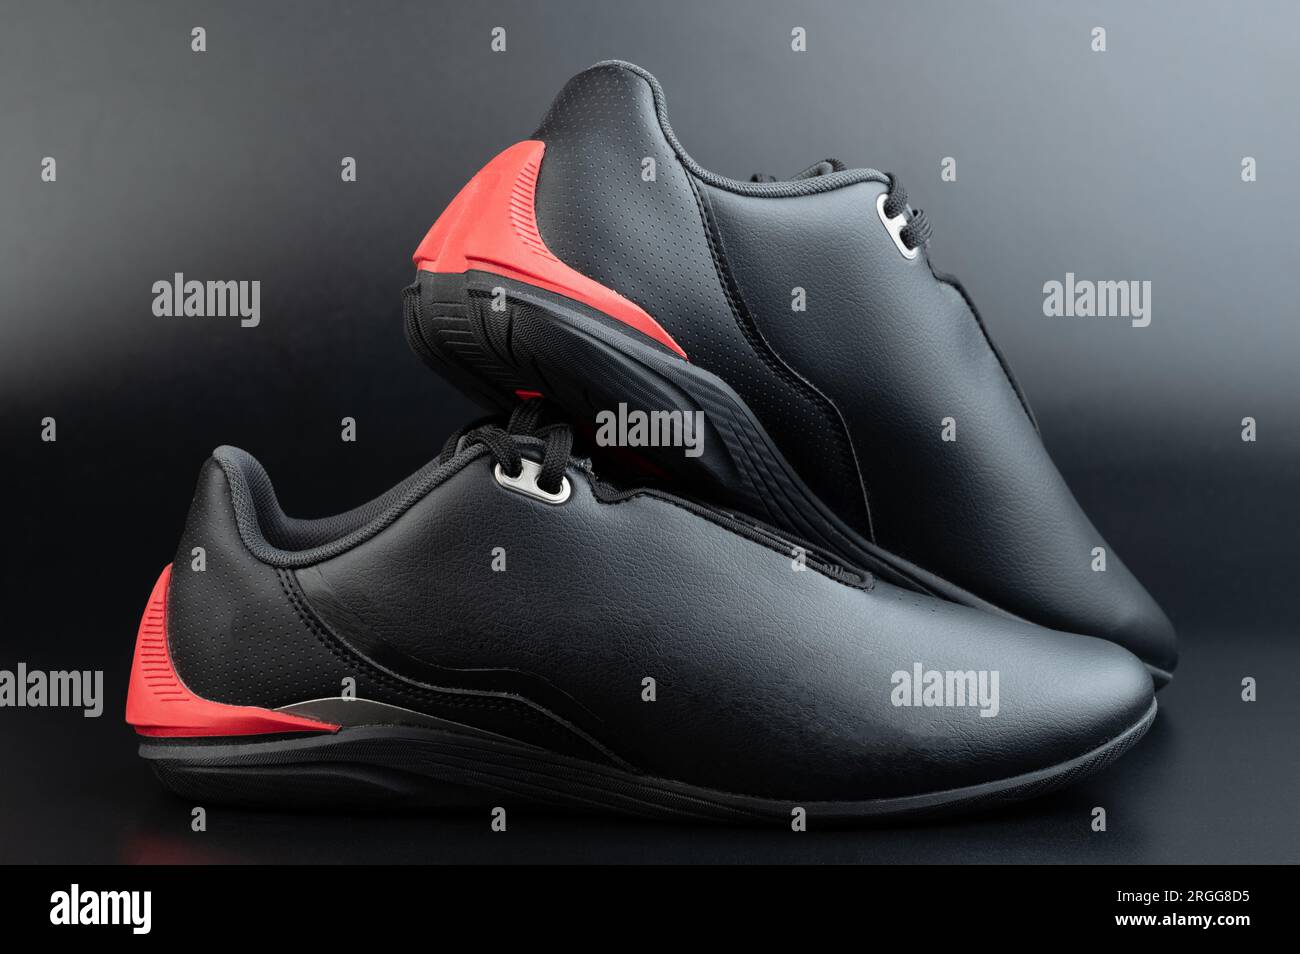 Black pair motosport shoes with flat sole isolated on studio background Stock Photo